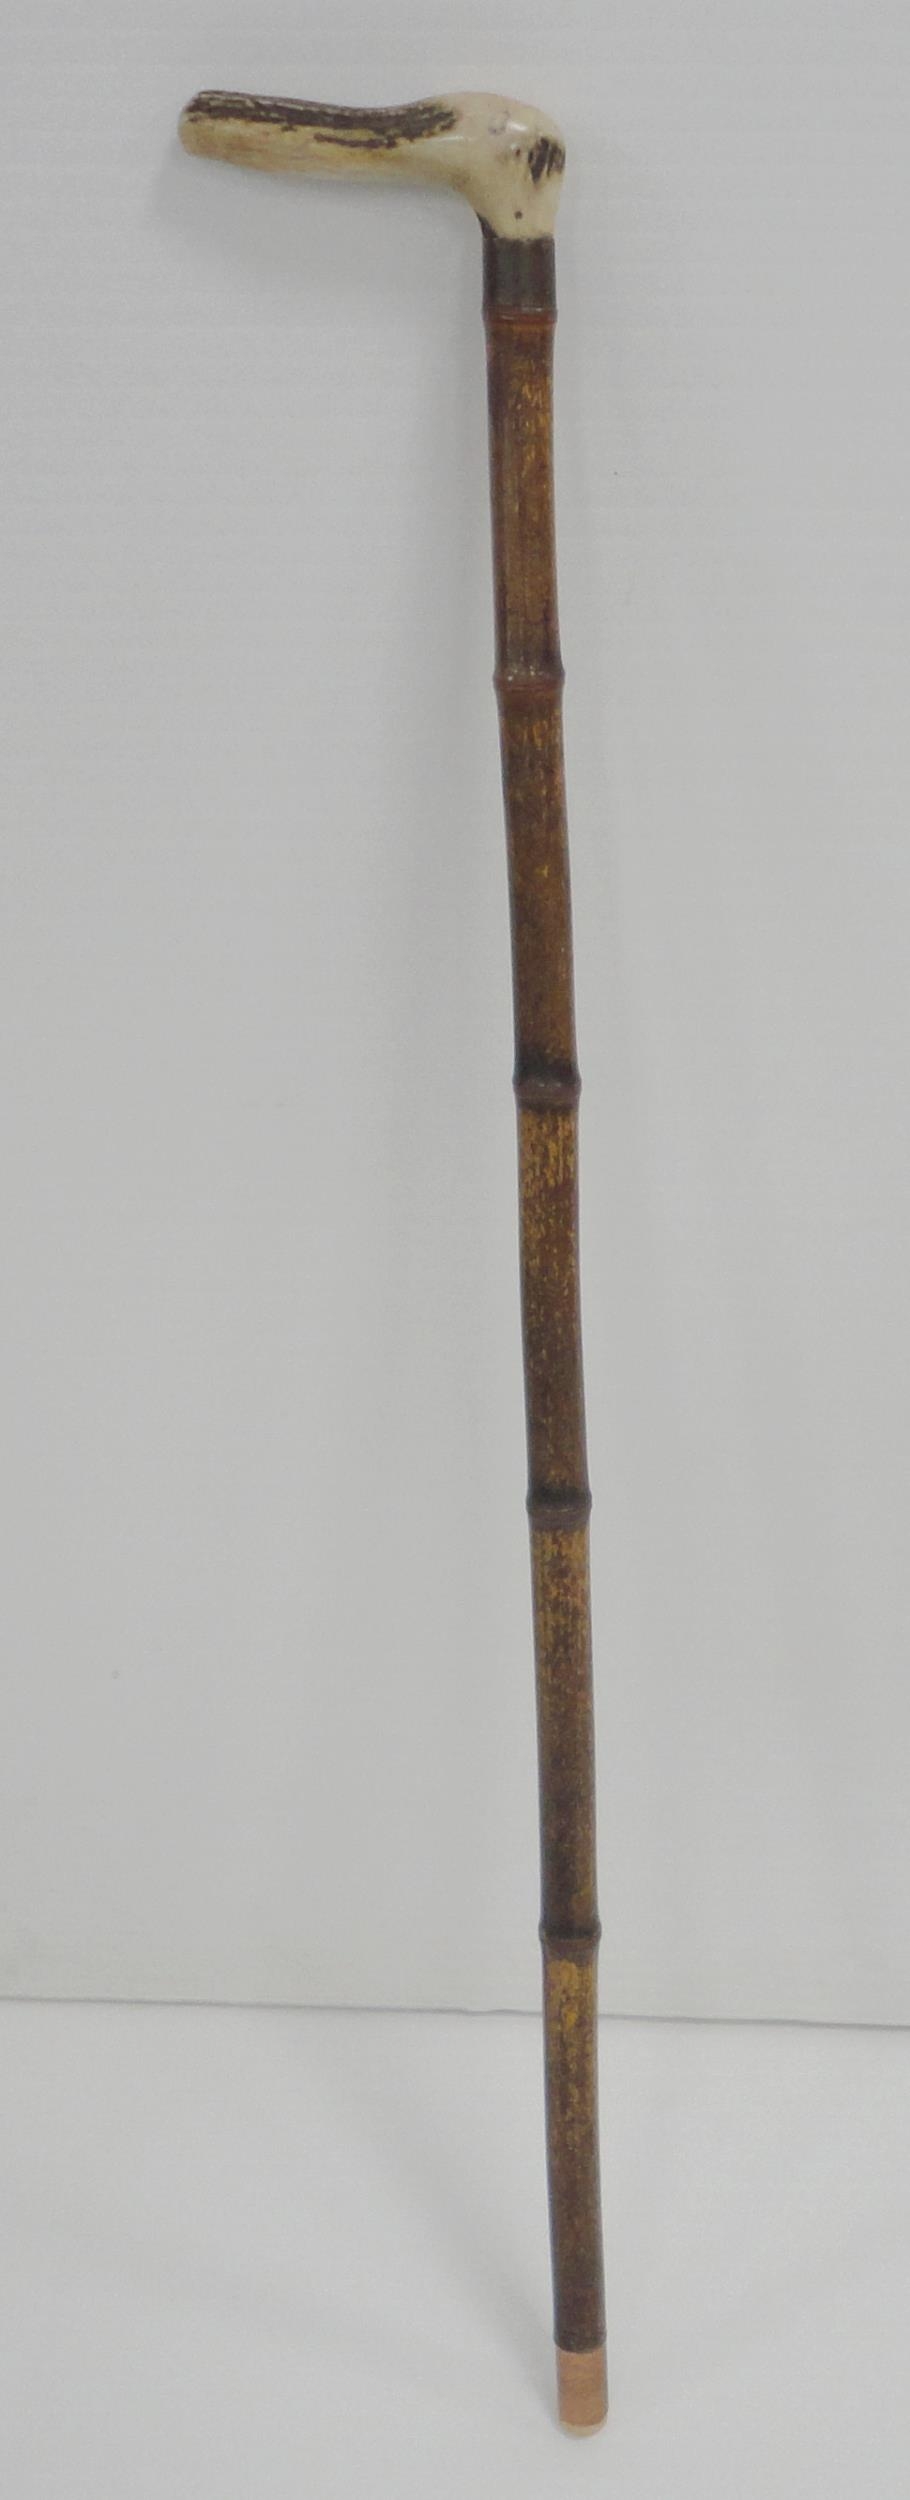 Bamboo and antler-handled walking cane with graduation for measuring the height of horses, 94cm, a - Image 7 of 20